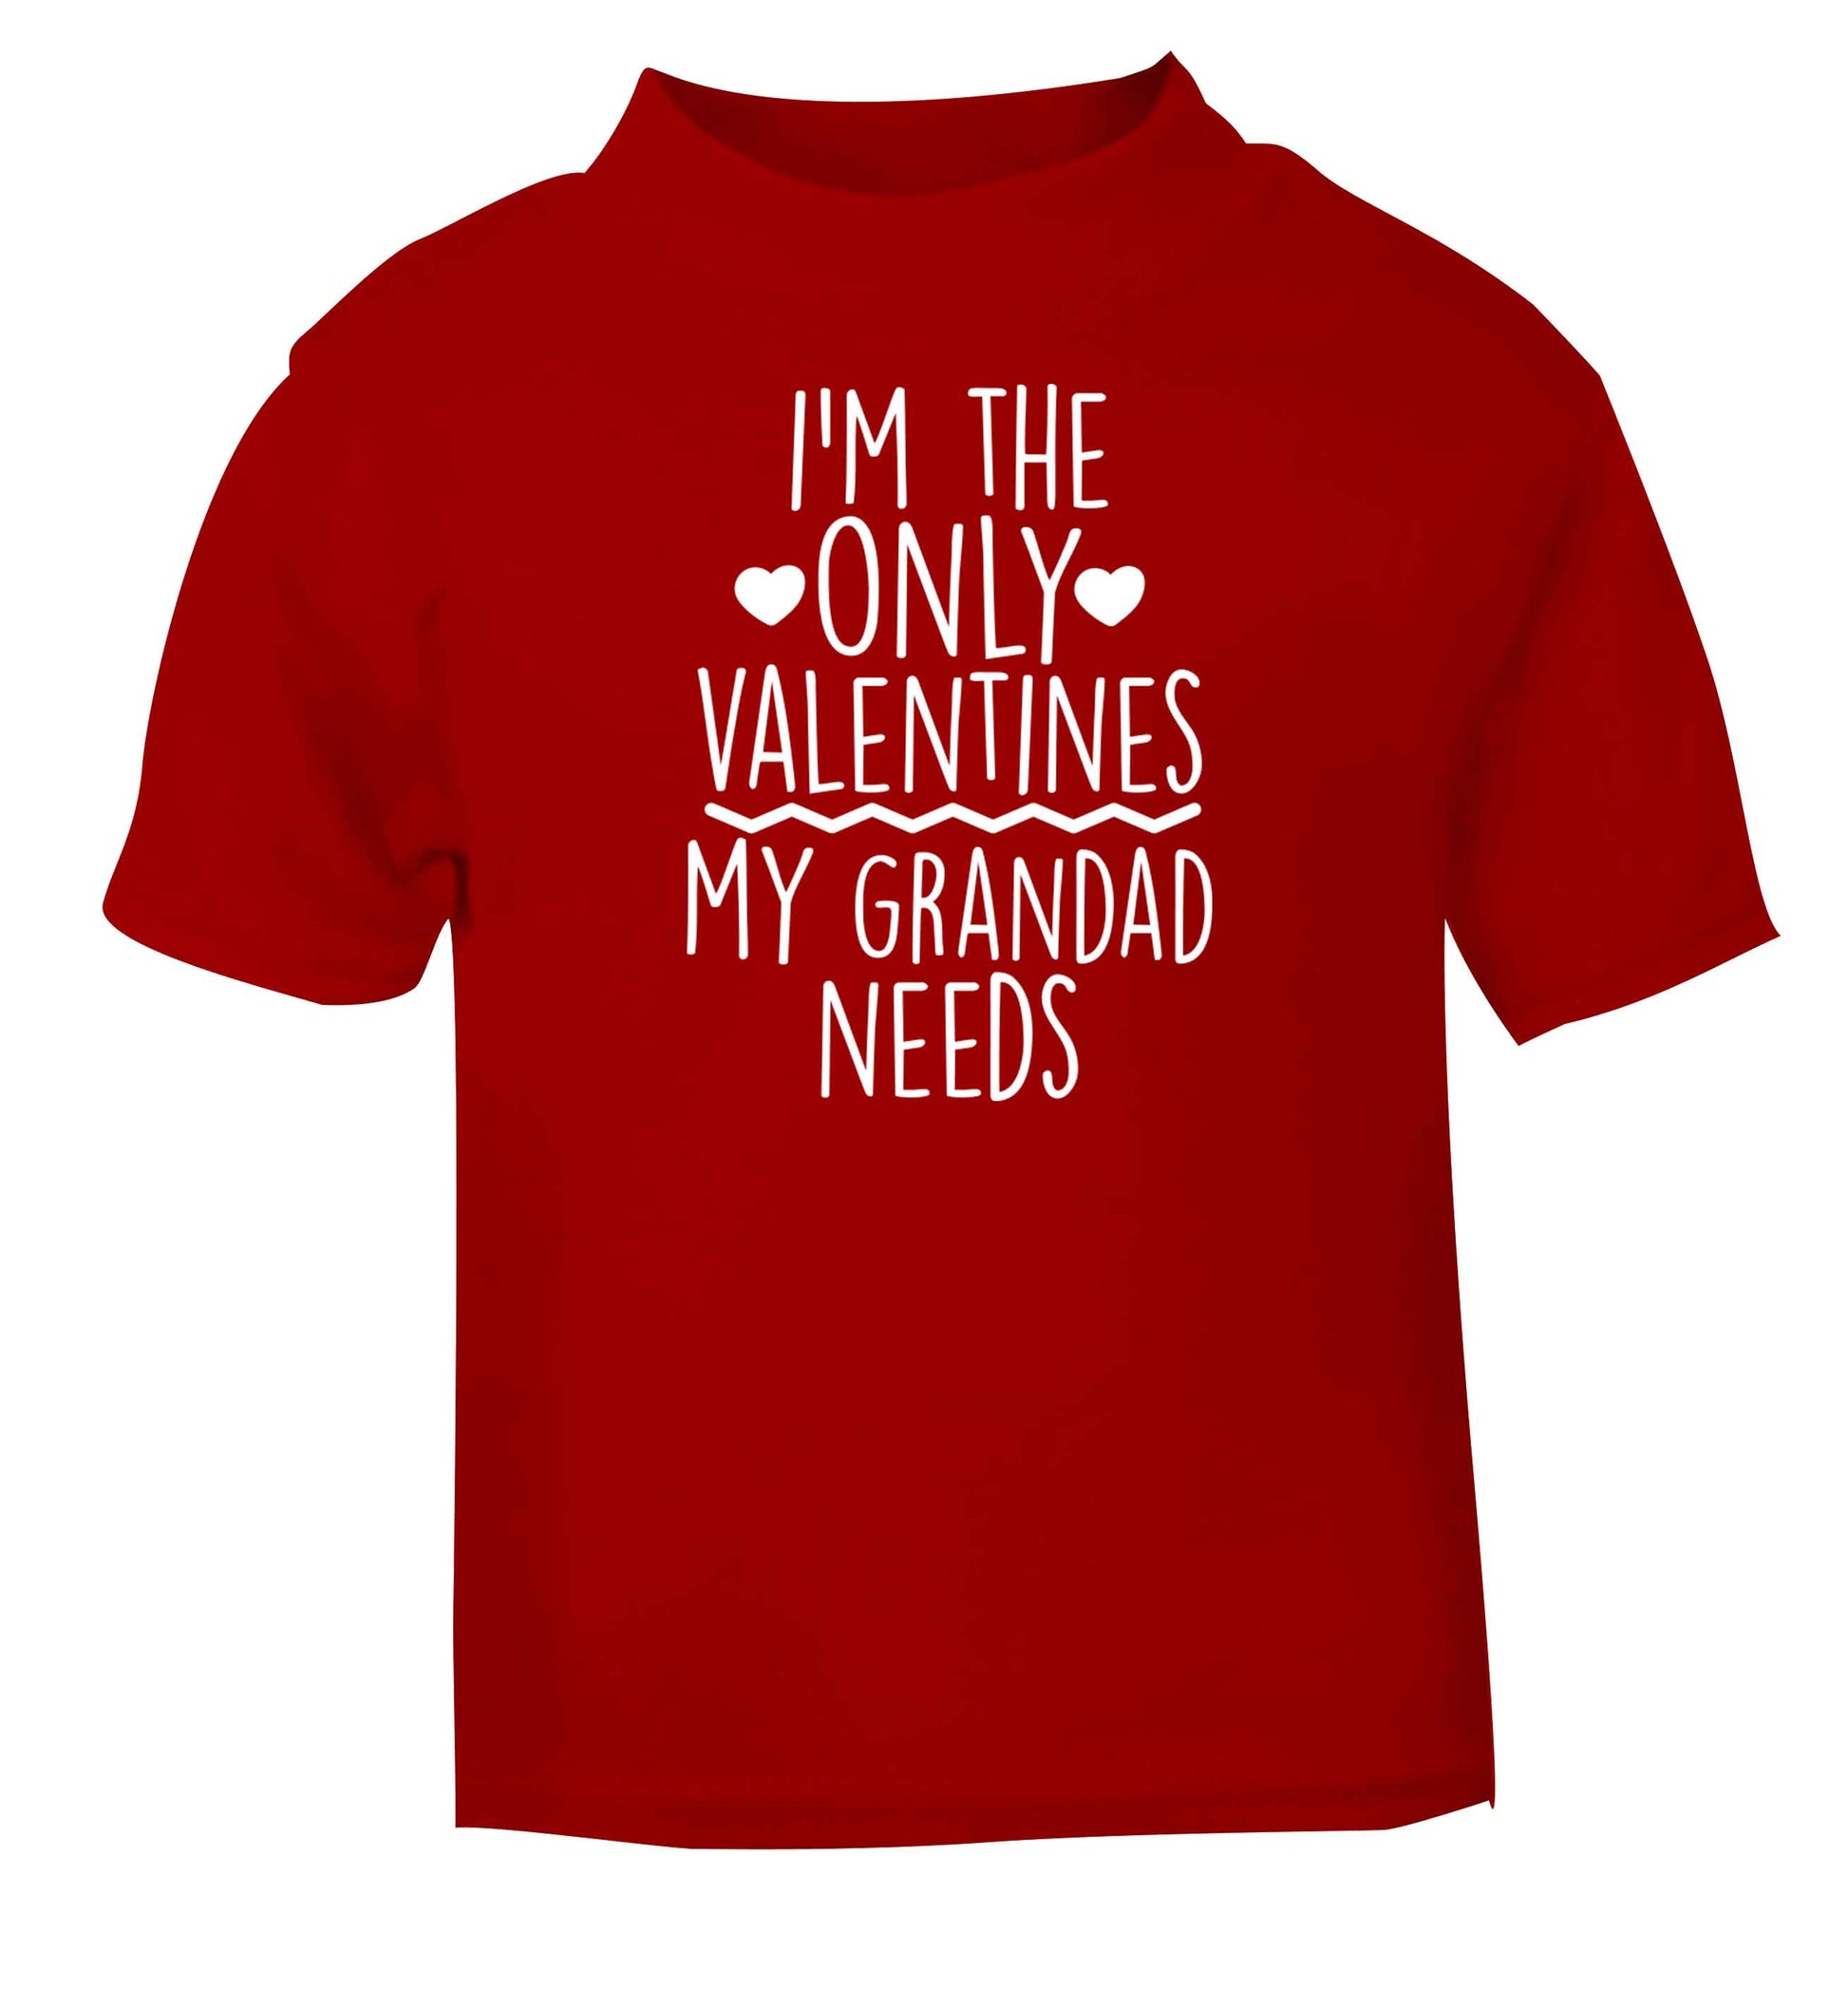 I'm the only valentines my grandad needs red baby toddler Tshirt 2 Years